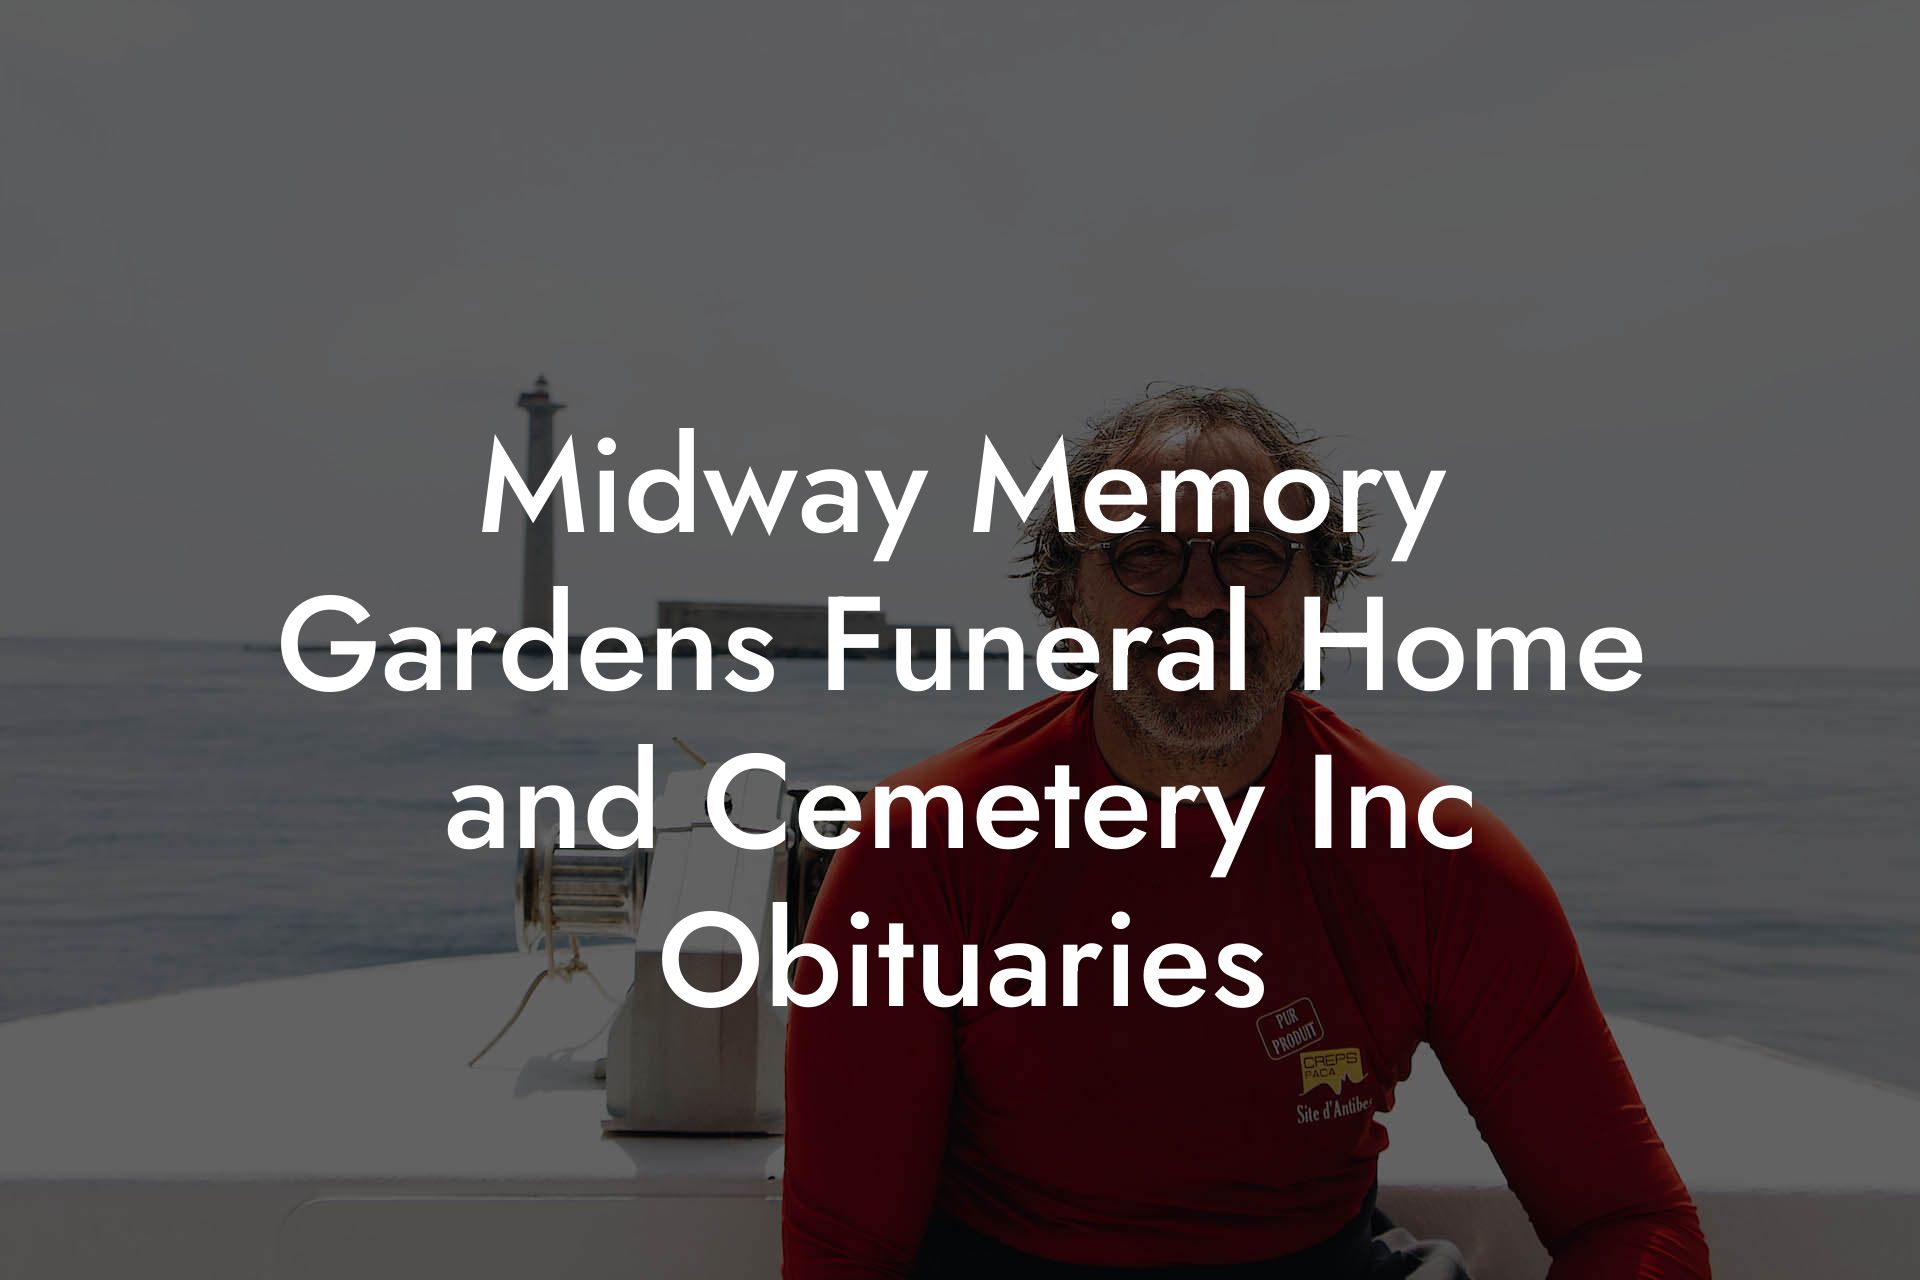 Midway Memory Gardens Funeral Home and Cemetery Inc Obituaries